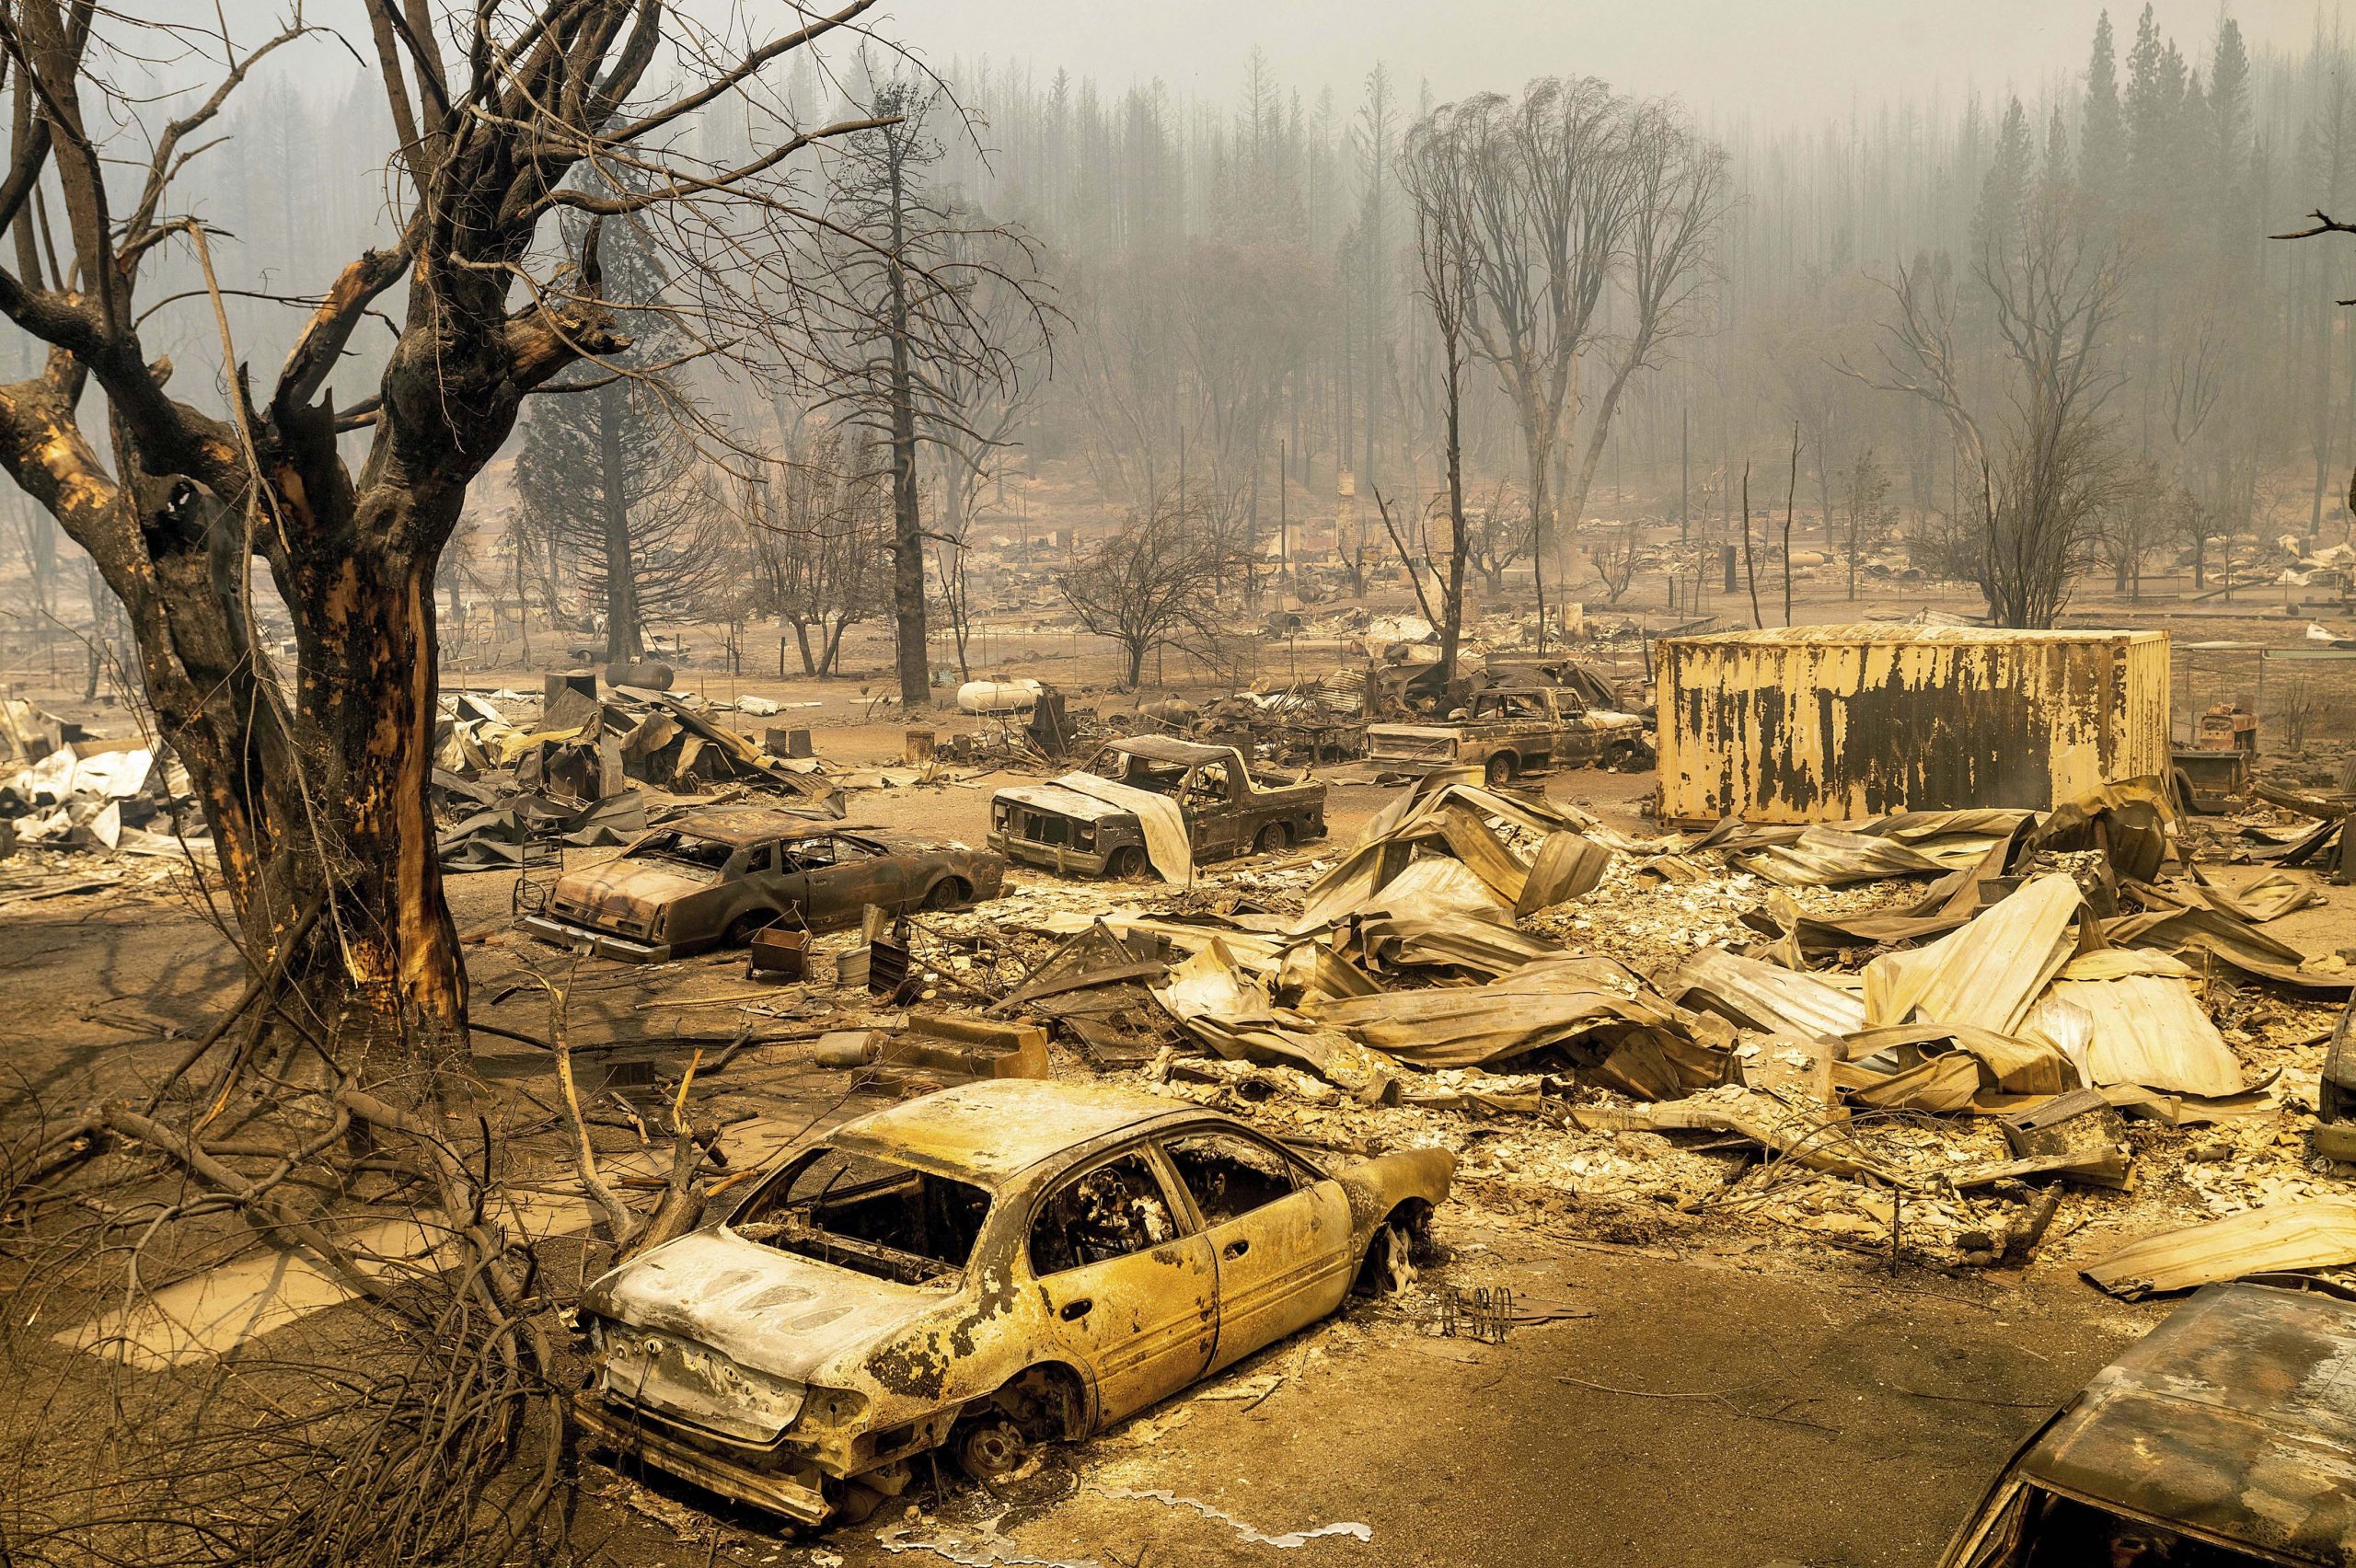 California’s Dixie wildfire is now the second-largest fire in the state’s history